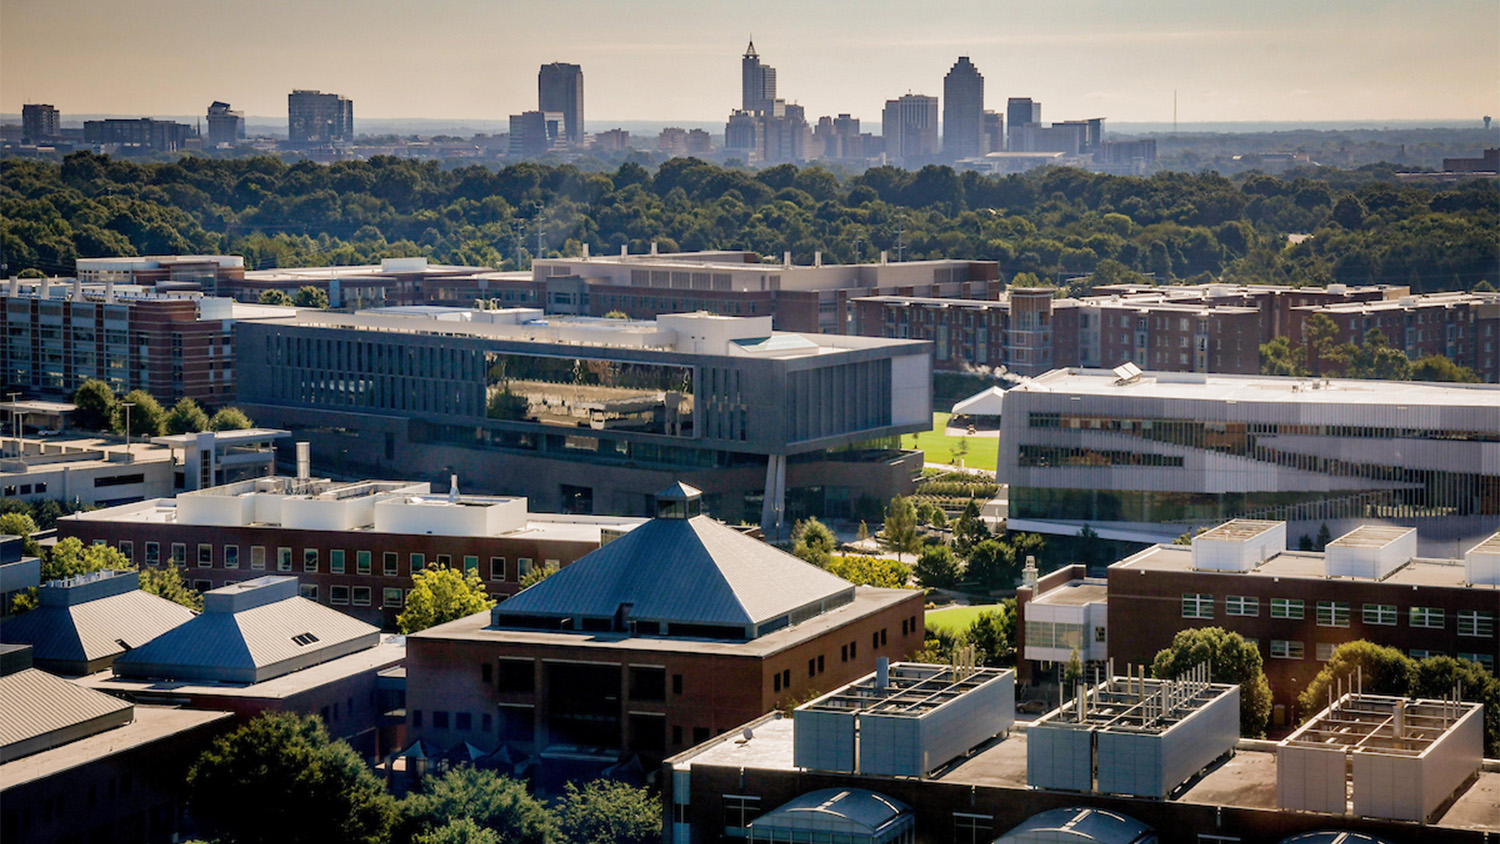 Aerial view of Centennial Campus with downtown Raleigh in the background